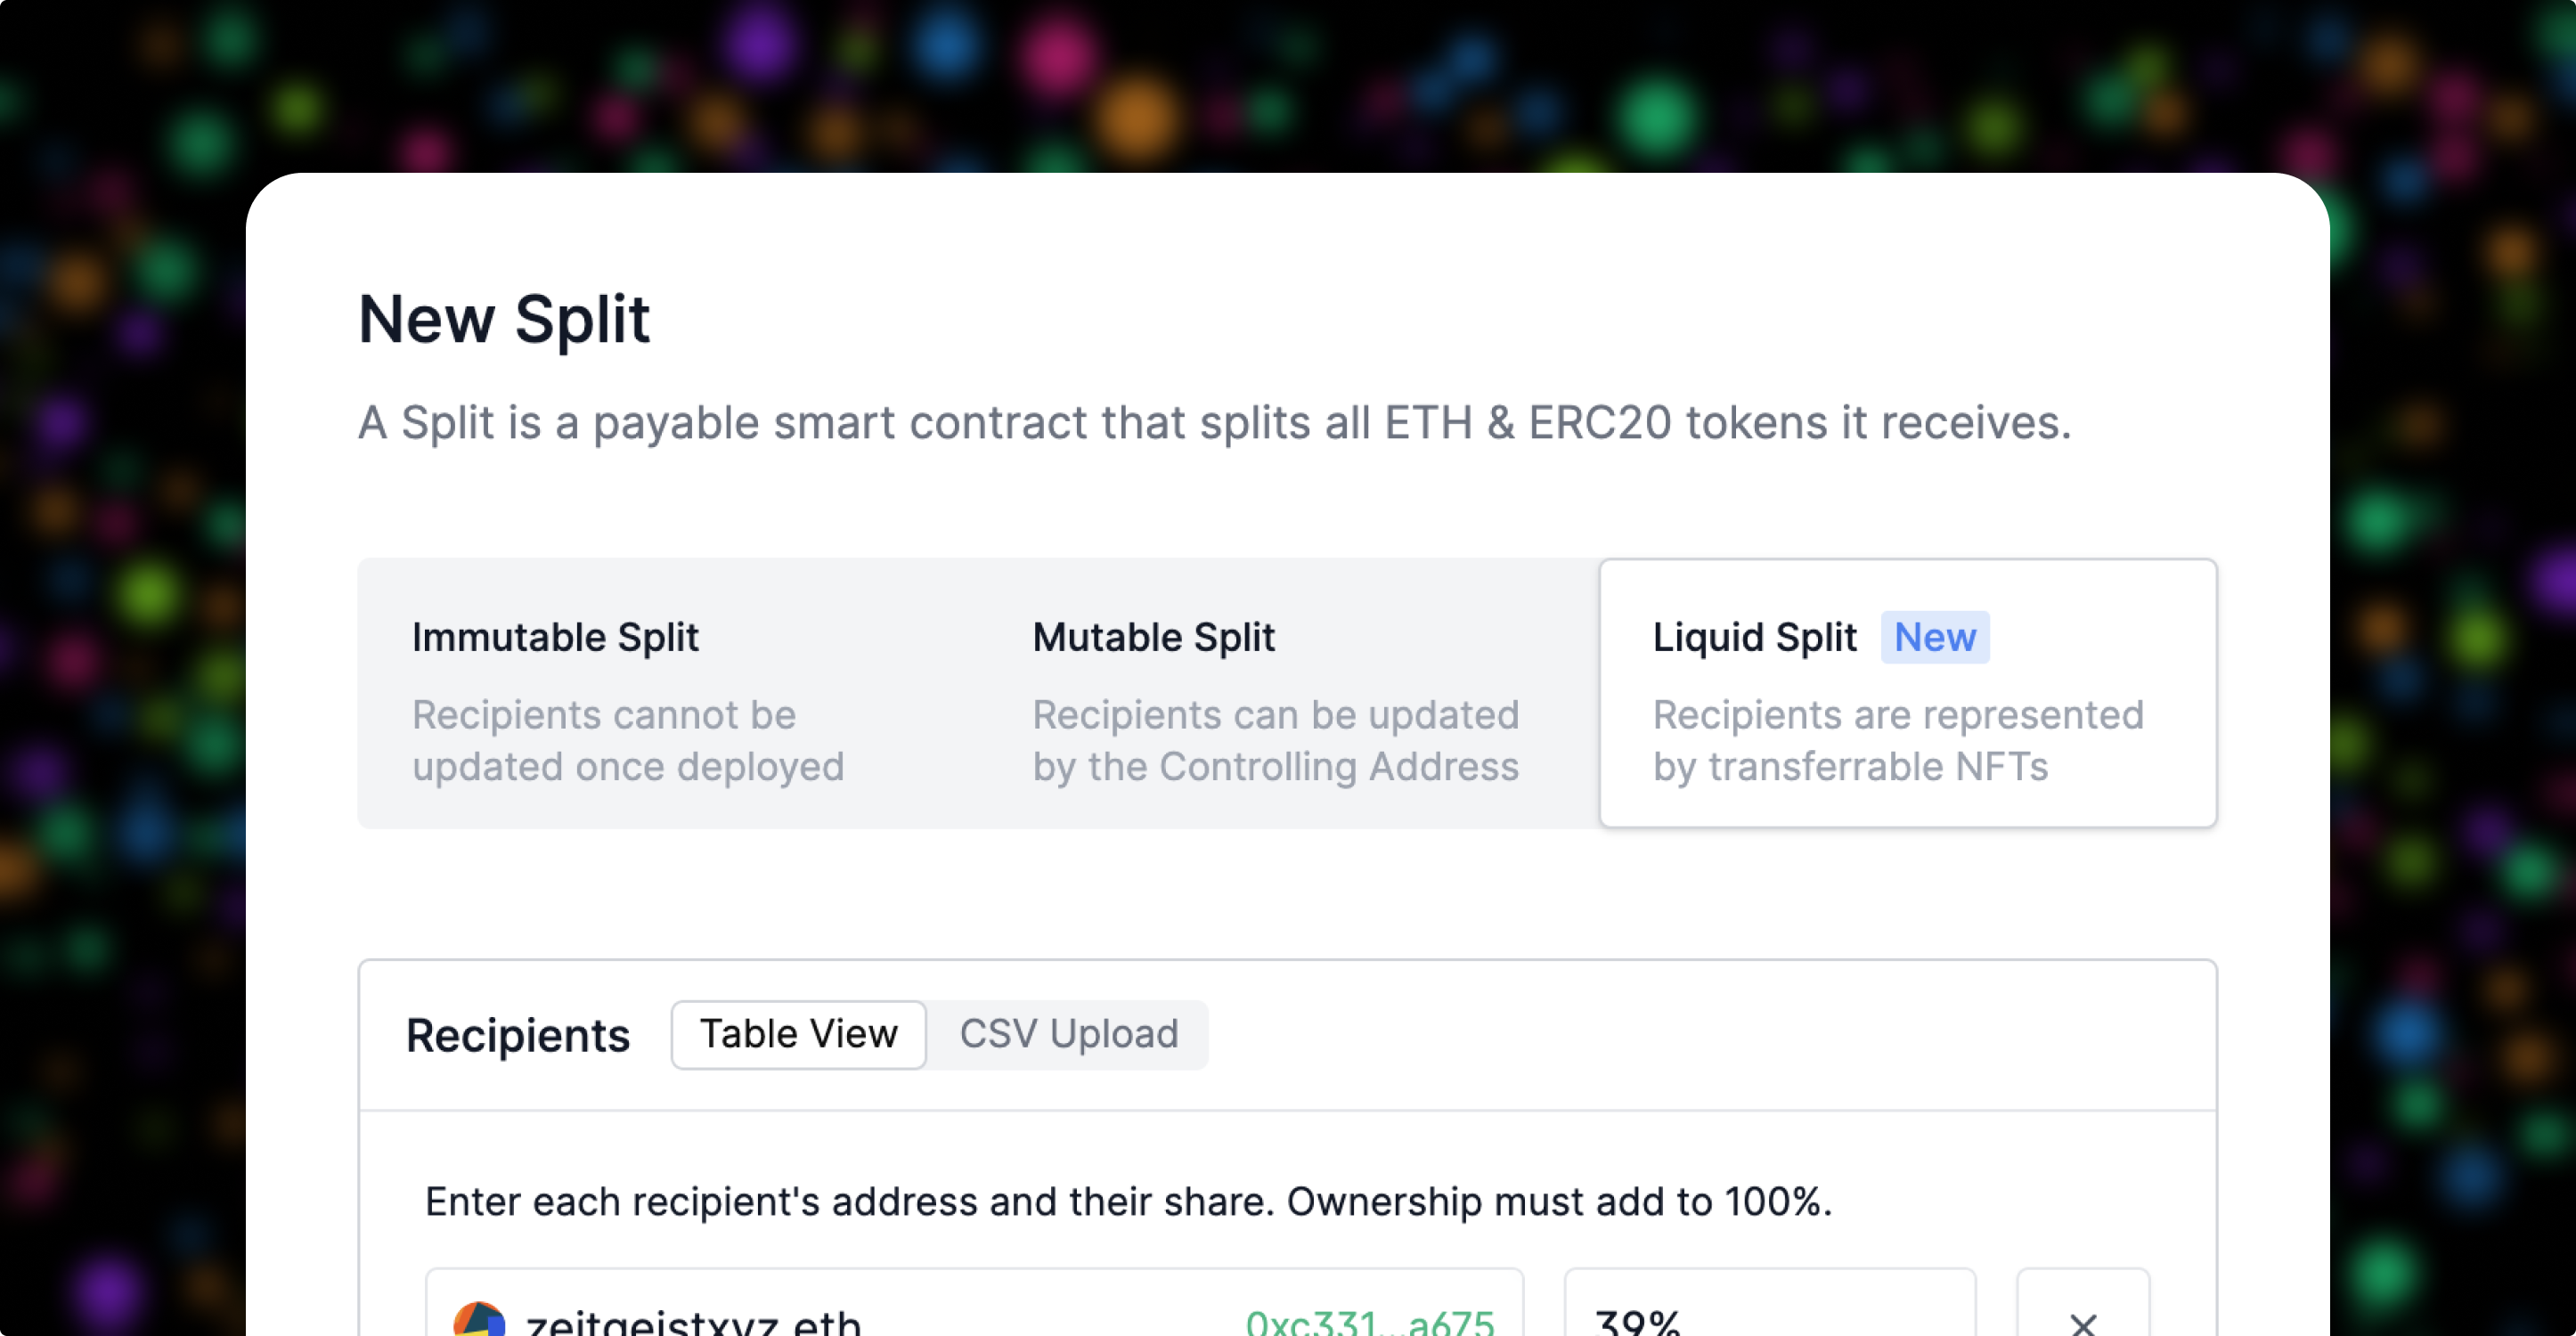 Just select “Liquid Split” as the type when creating a new Split – give it a try at split.new